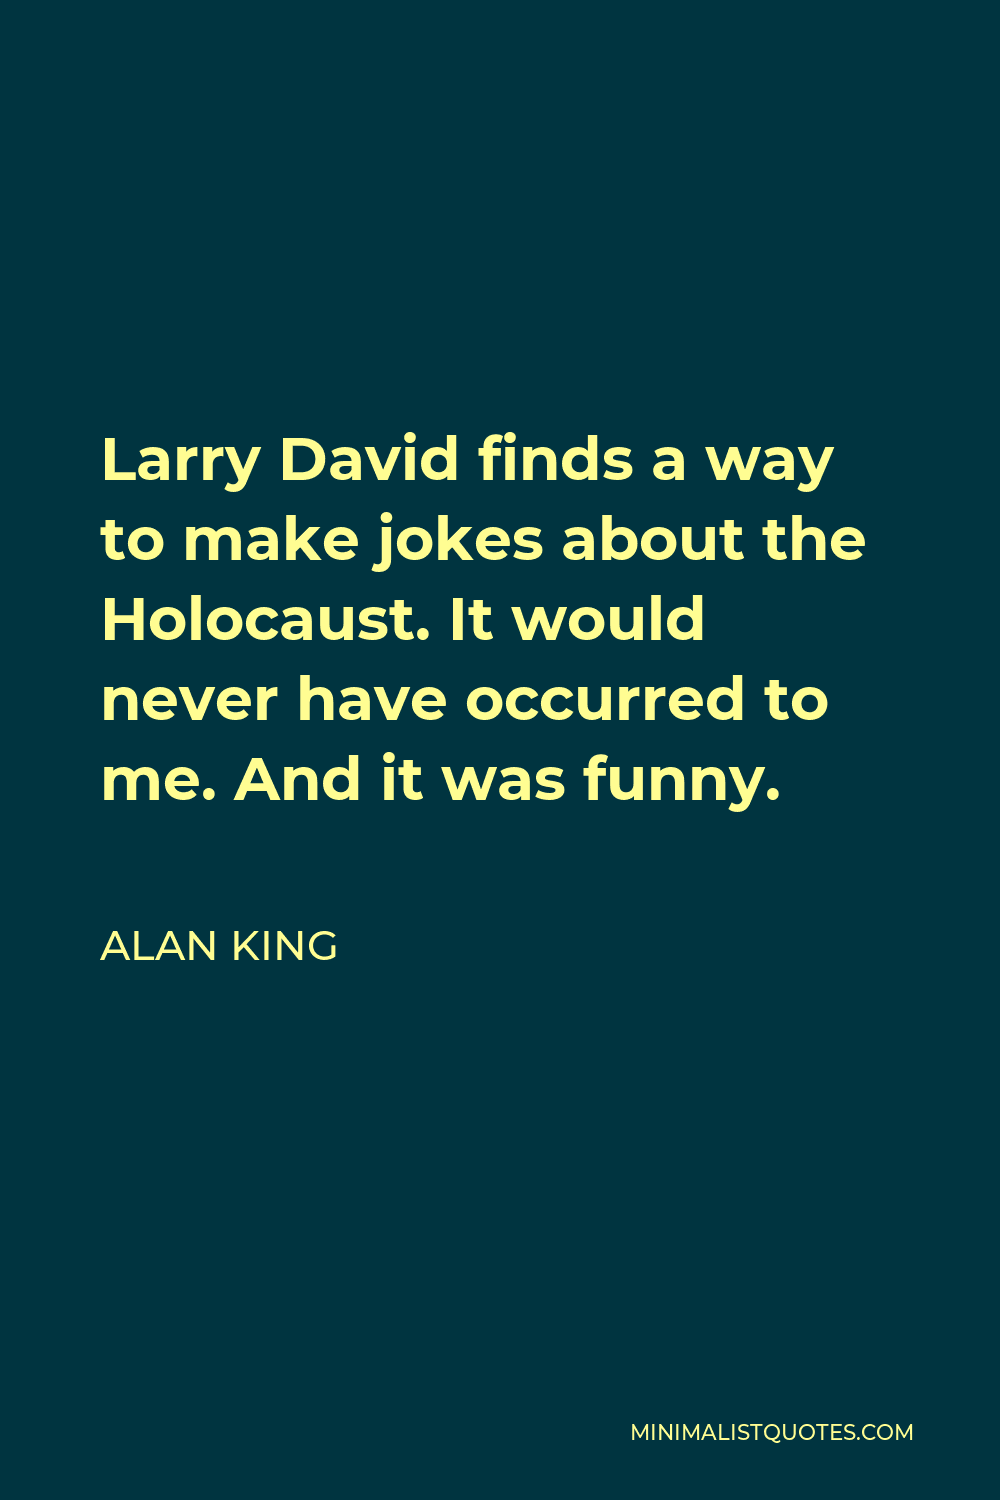 Alan King Quote - Larry David finds a way to make jokes about the Holocaust. It would never have occurred to me. And it was funny.